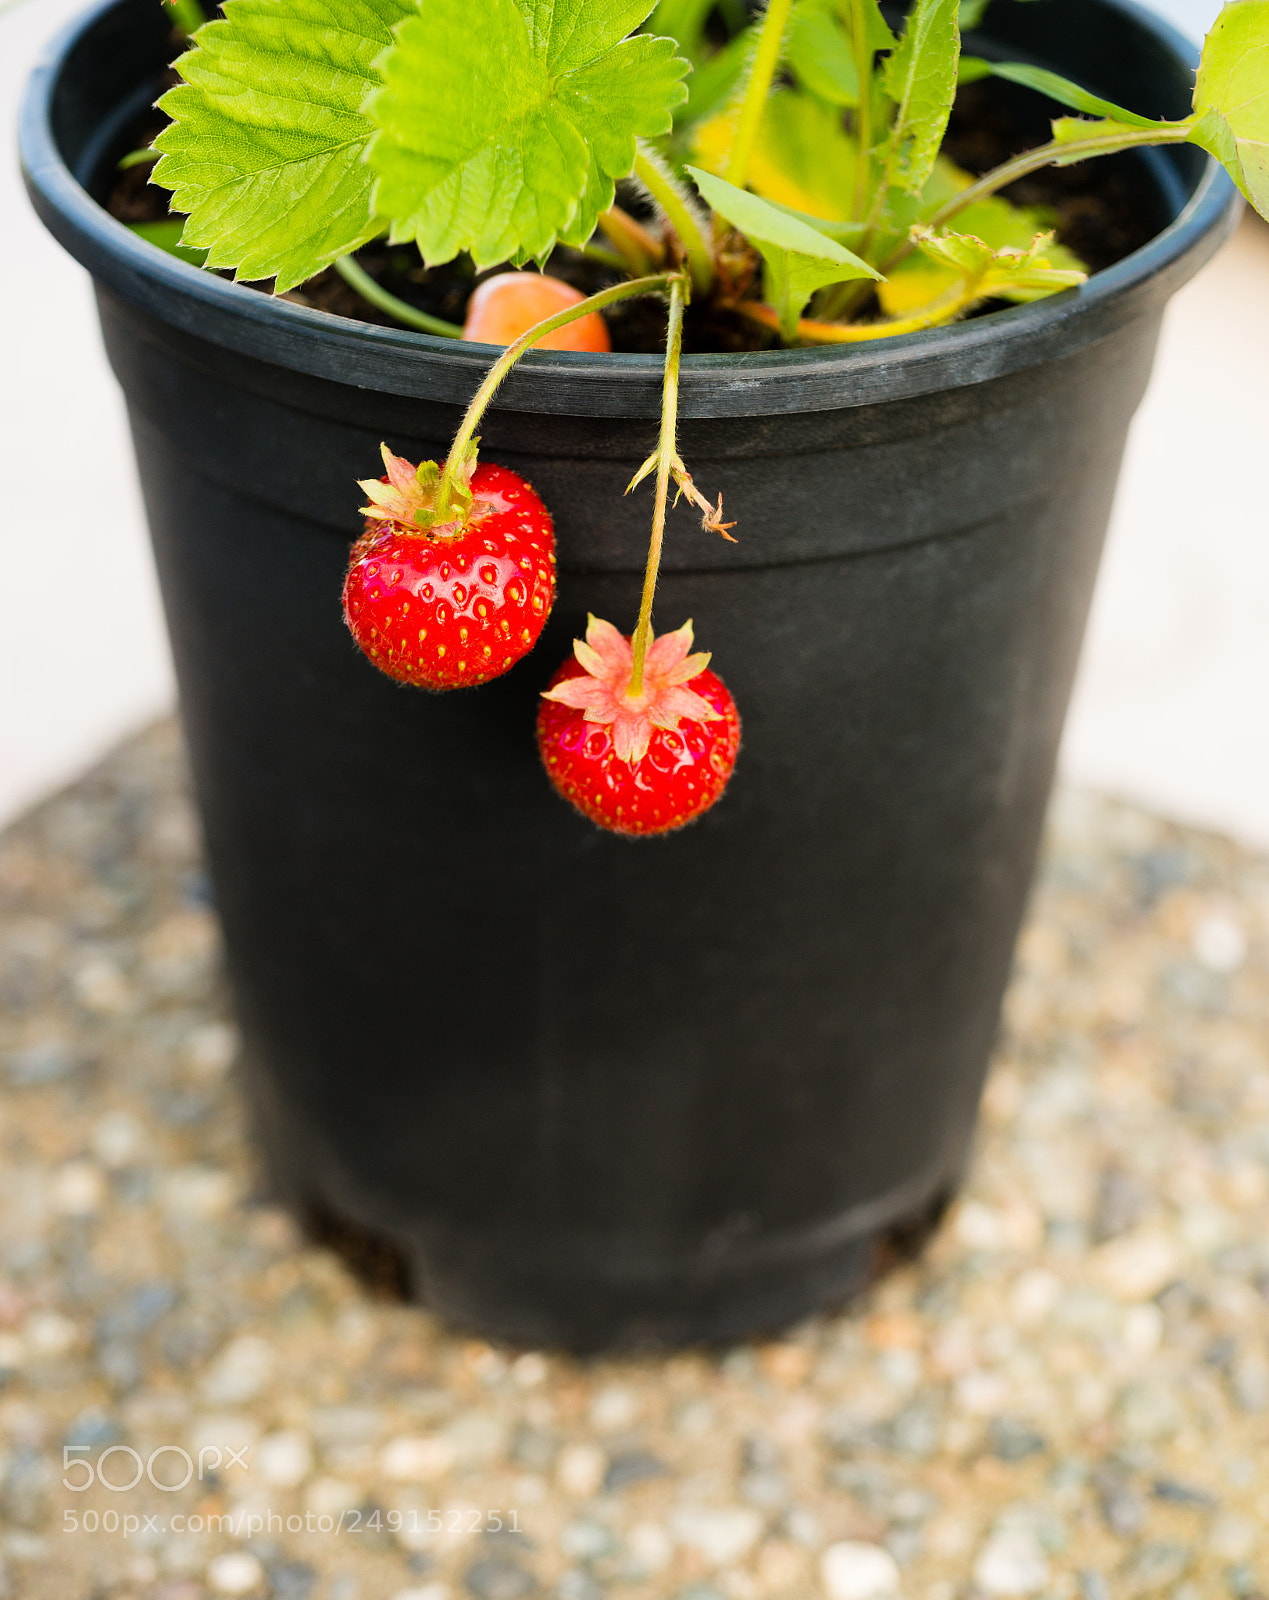 Sony a99 II sample photo. Young potted strawberry plant photography